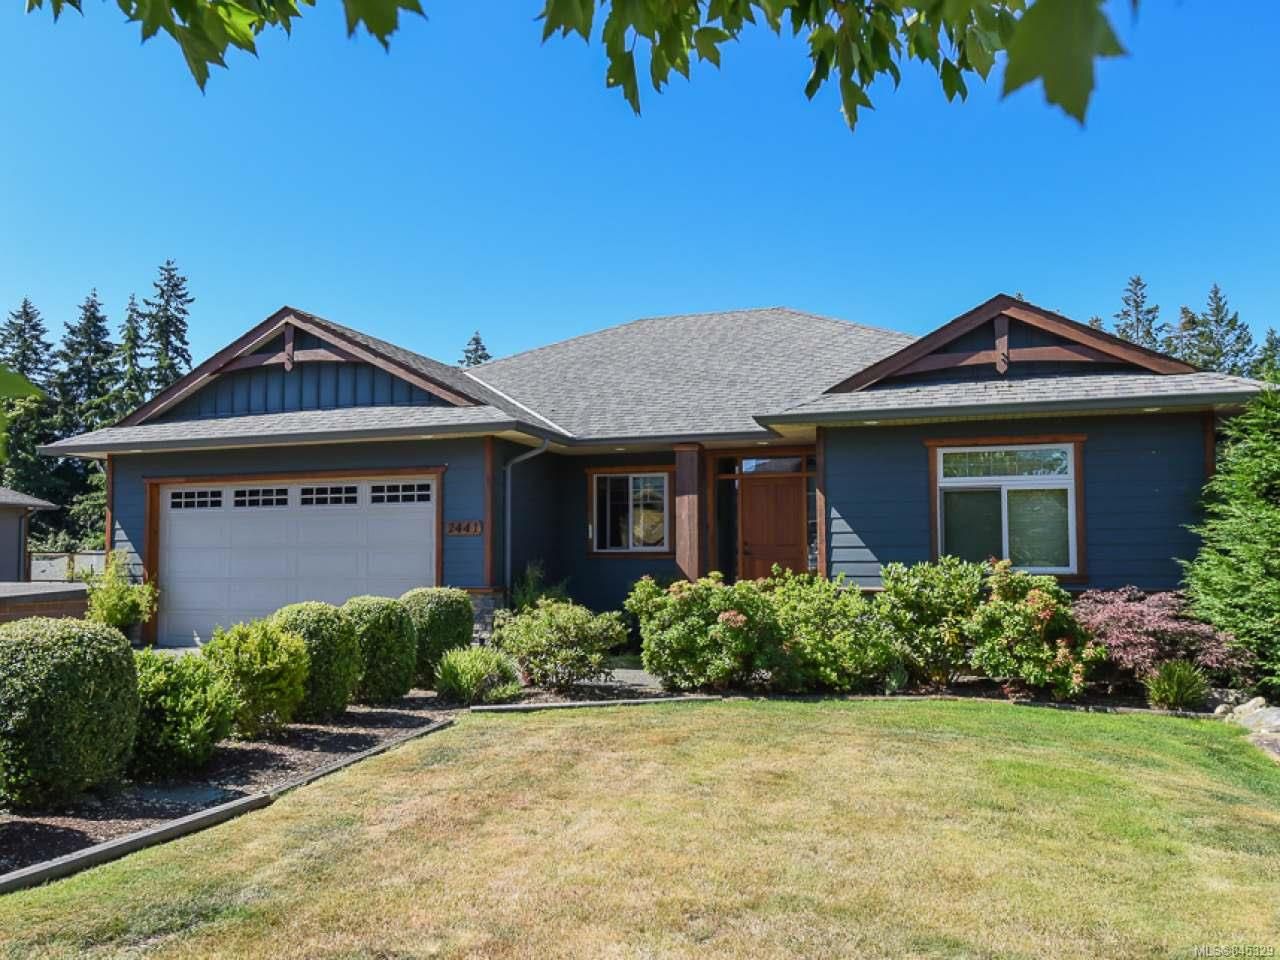 I have sold a property at 2441 Tutor Dr in COMOX
